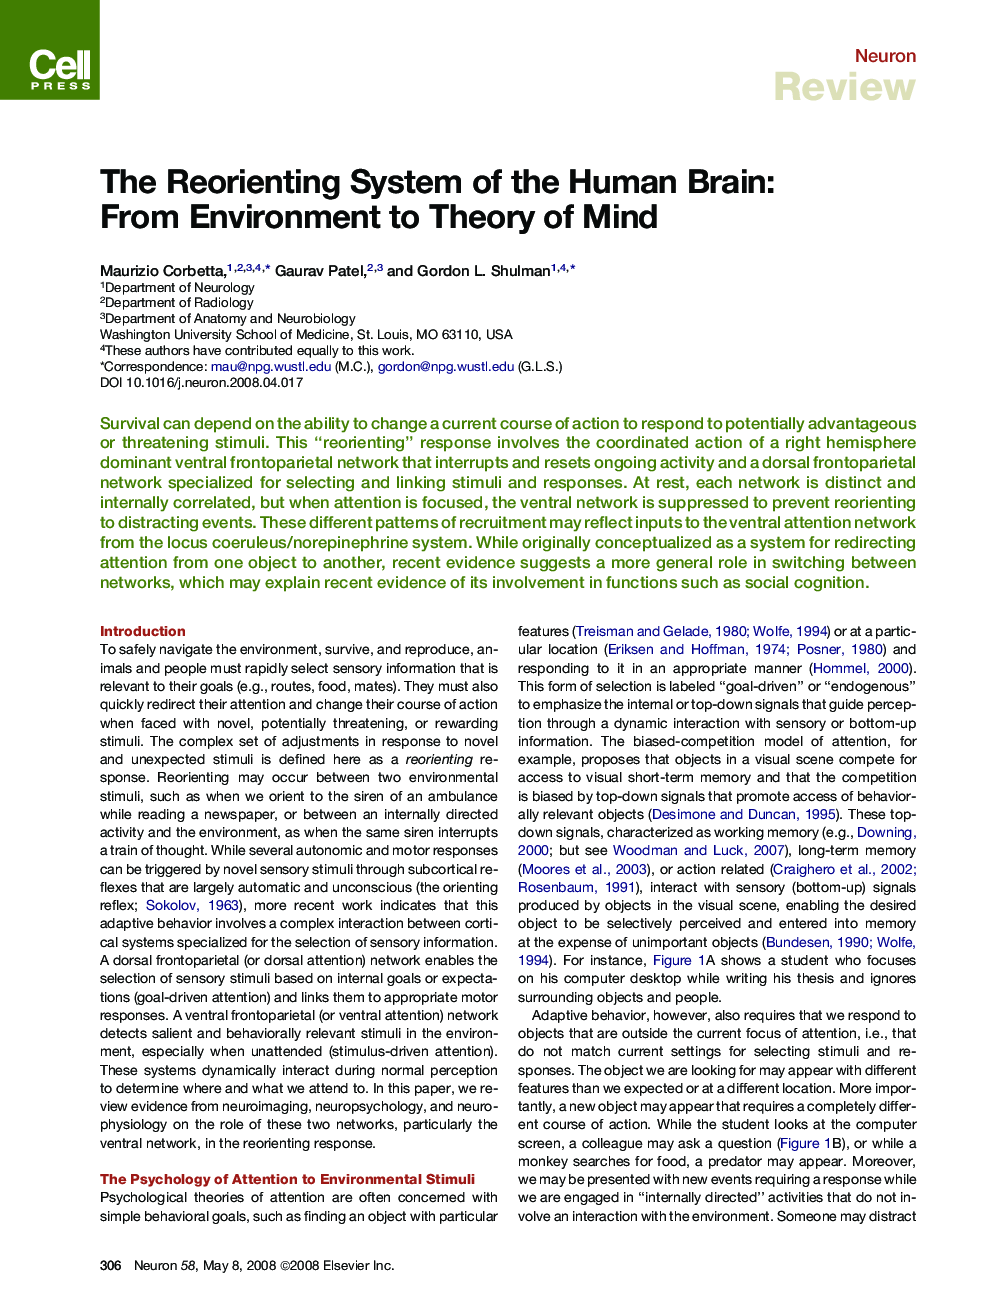 The Reorienting System of the Human Brain: From Environment to Theory of Mind